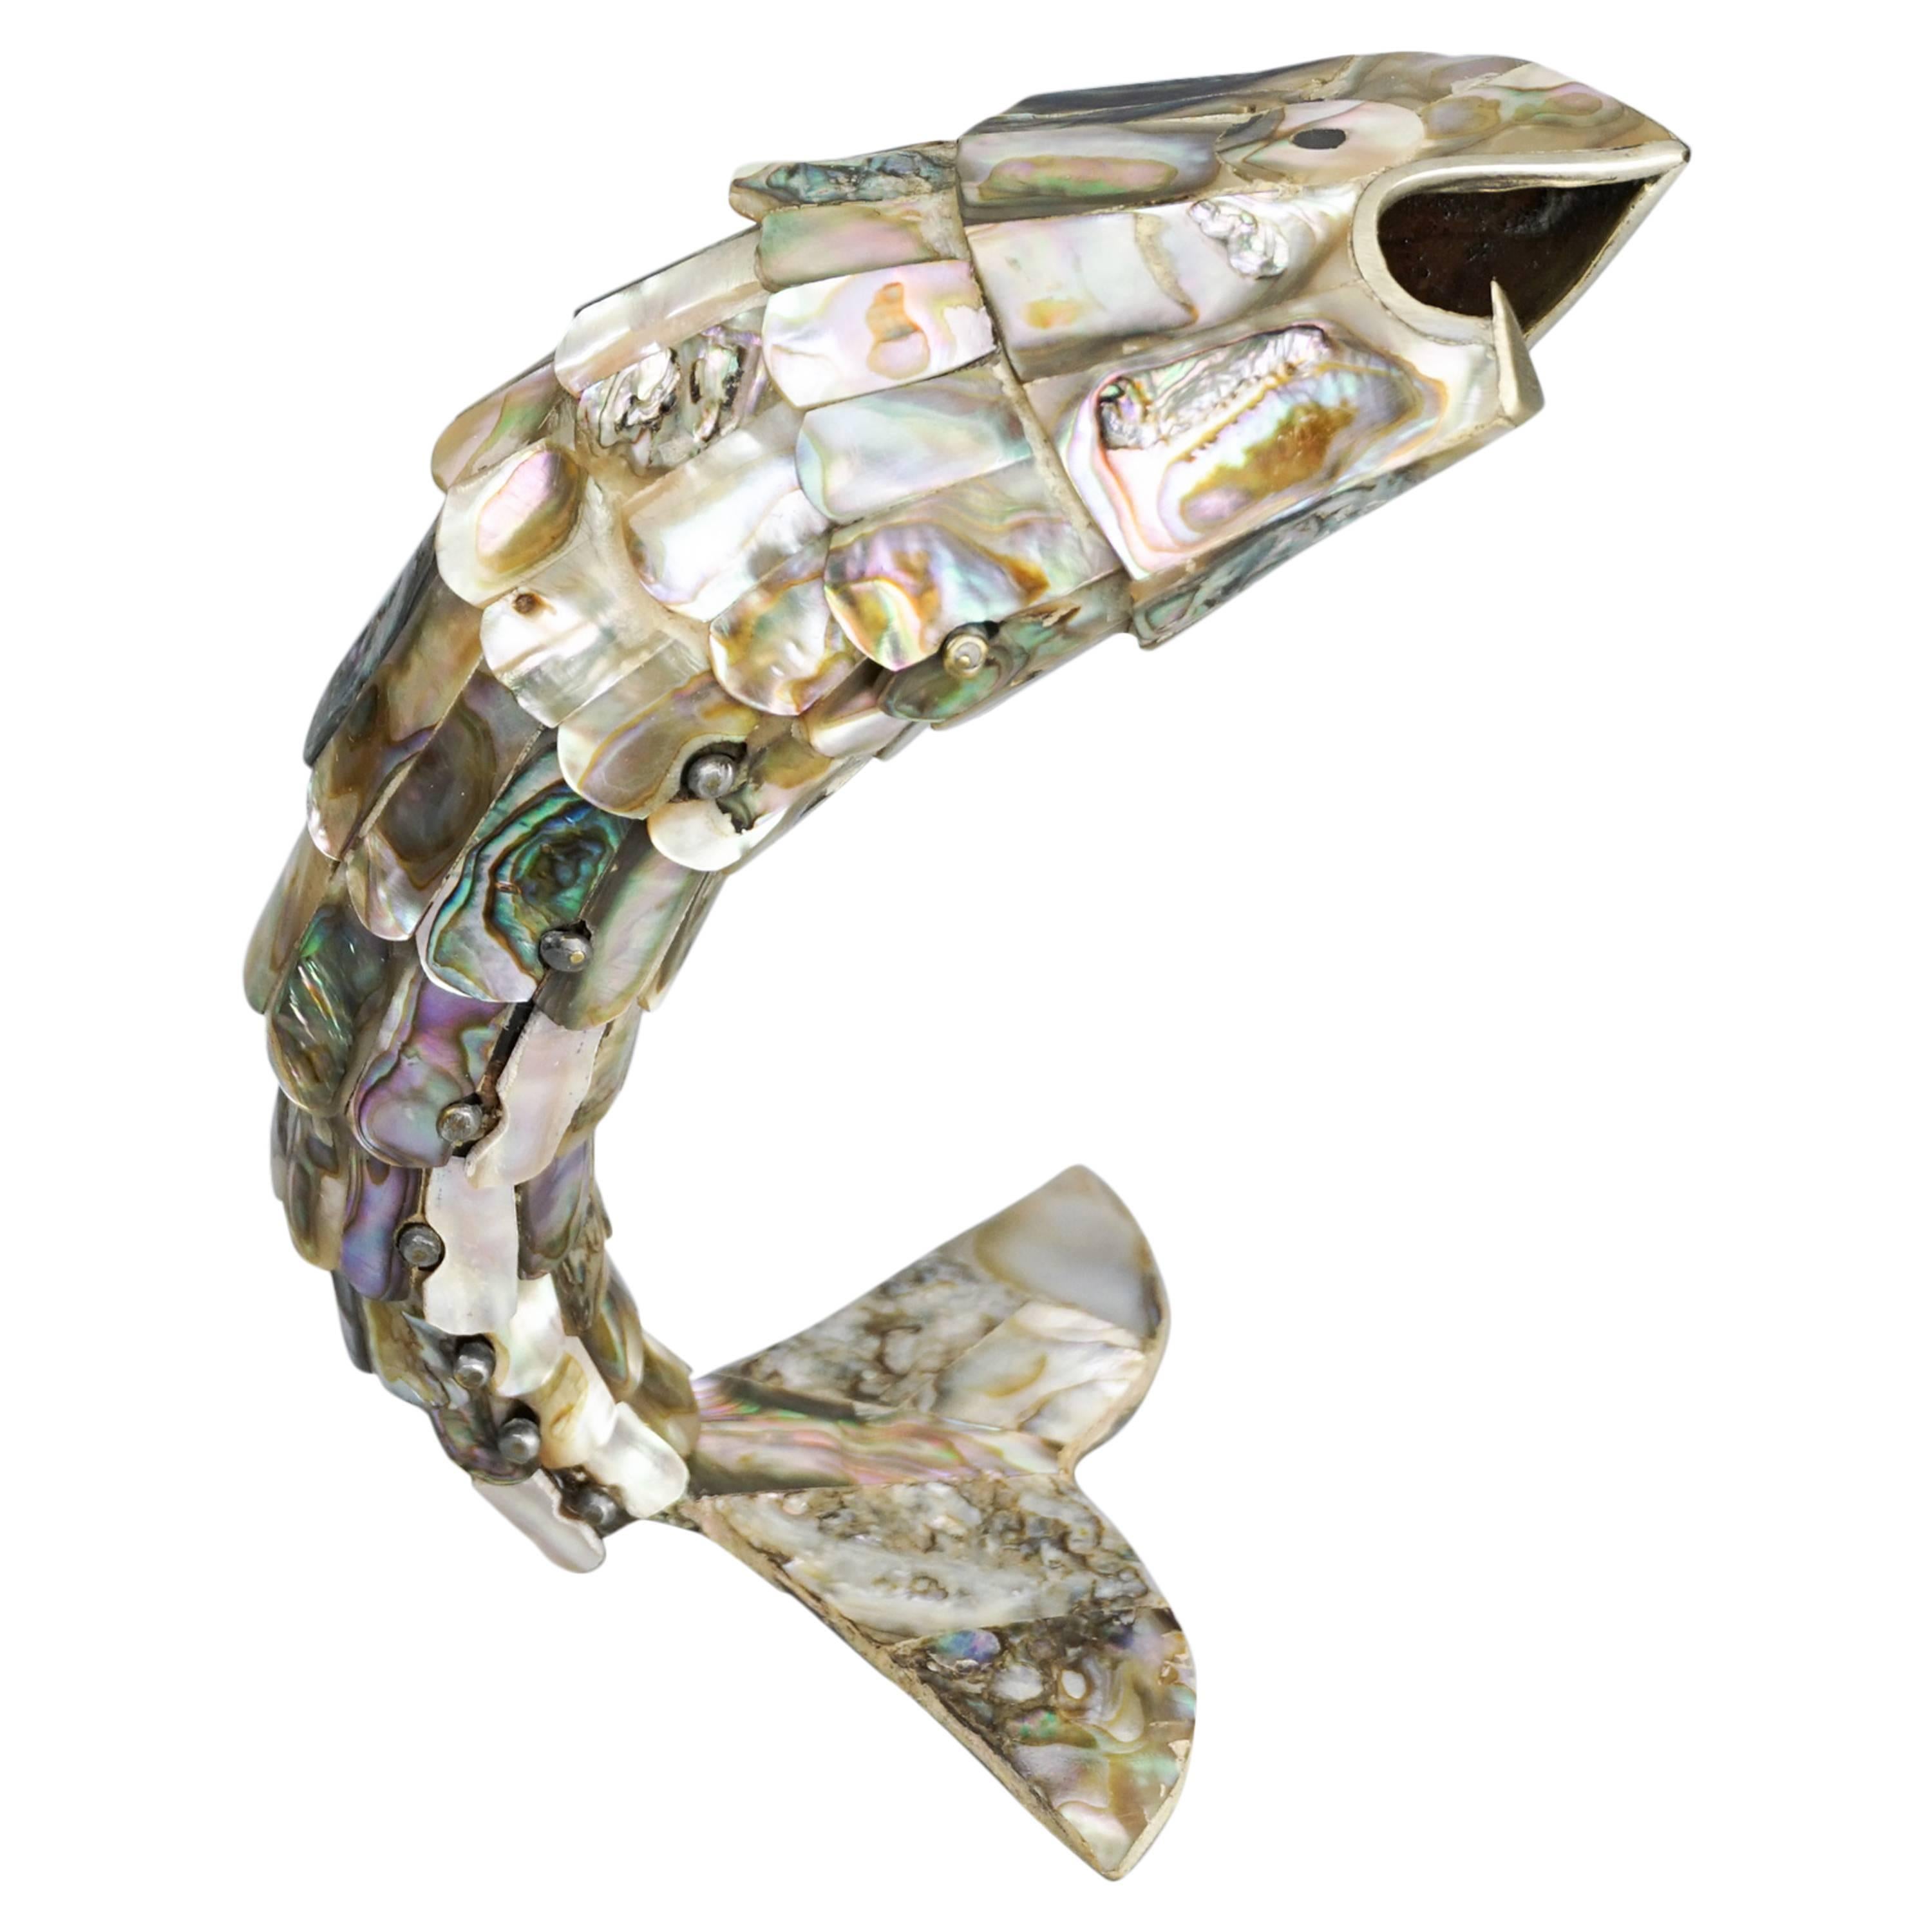 Abalone Articulated Mother of Pearl Fish 1950's Bottle Opener